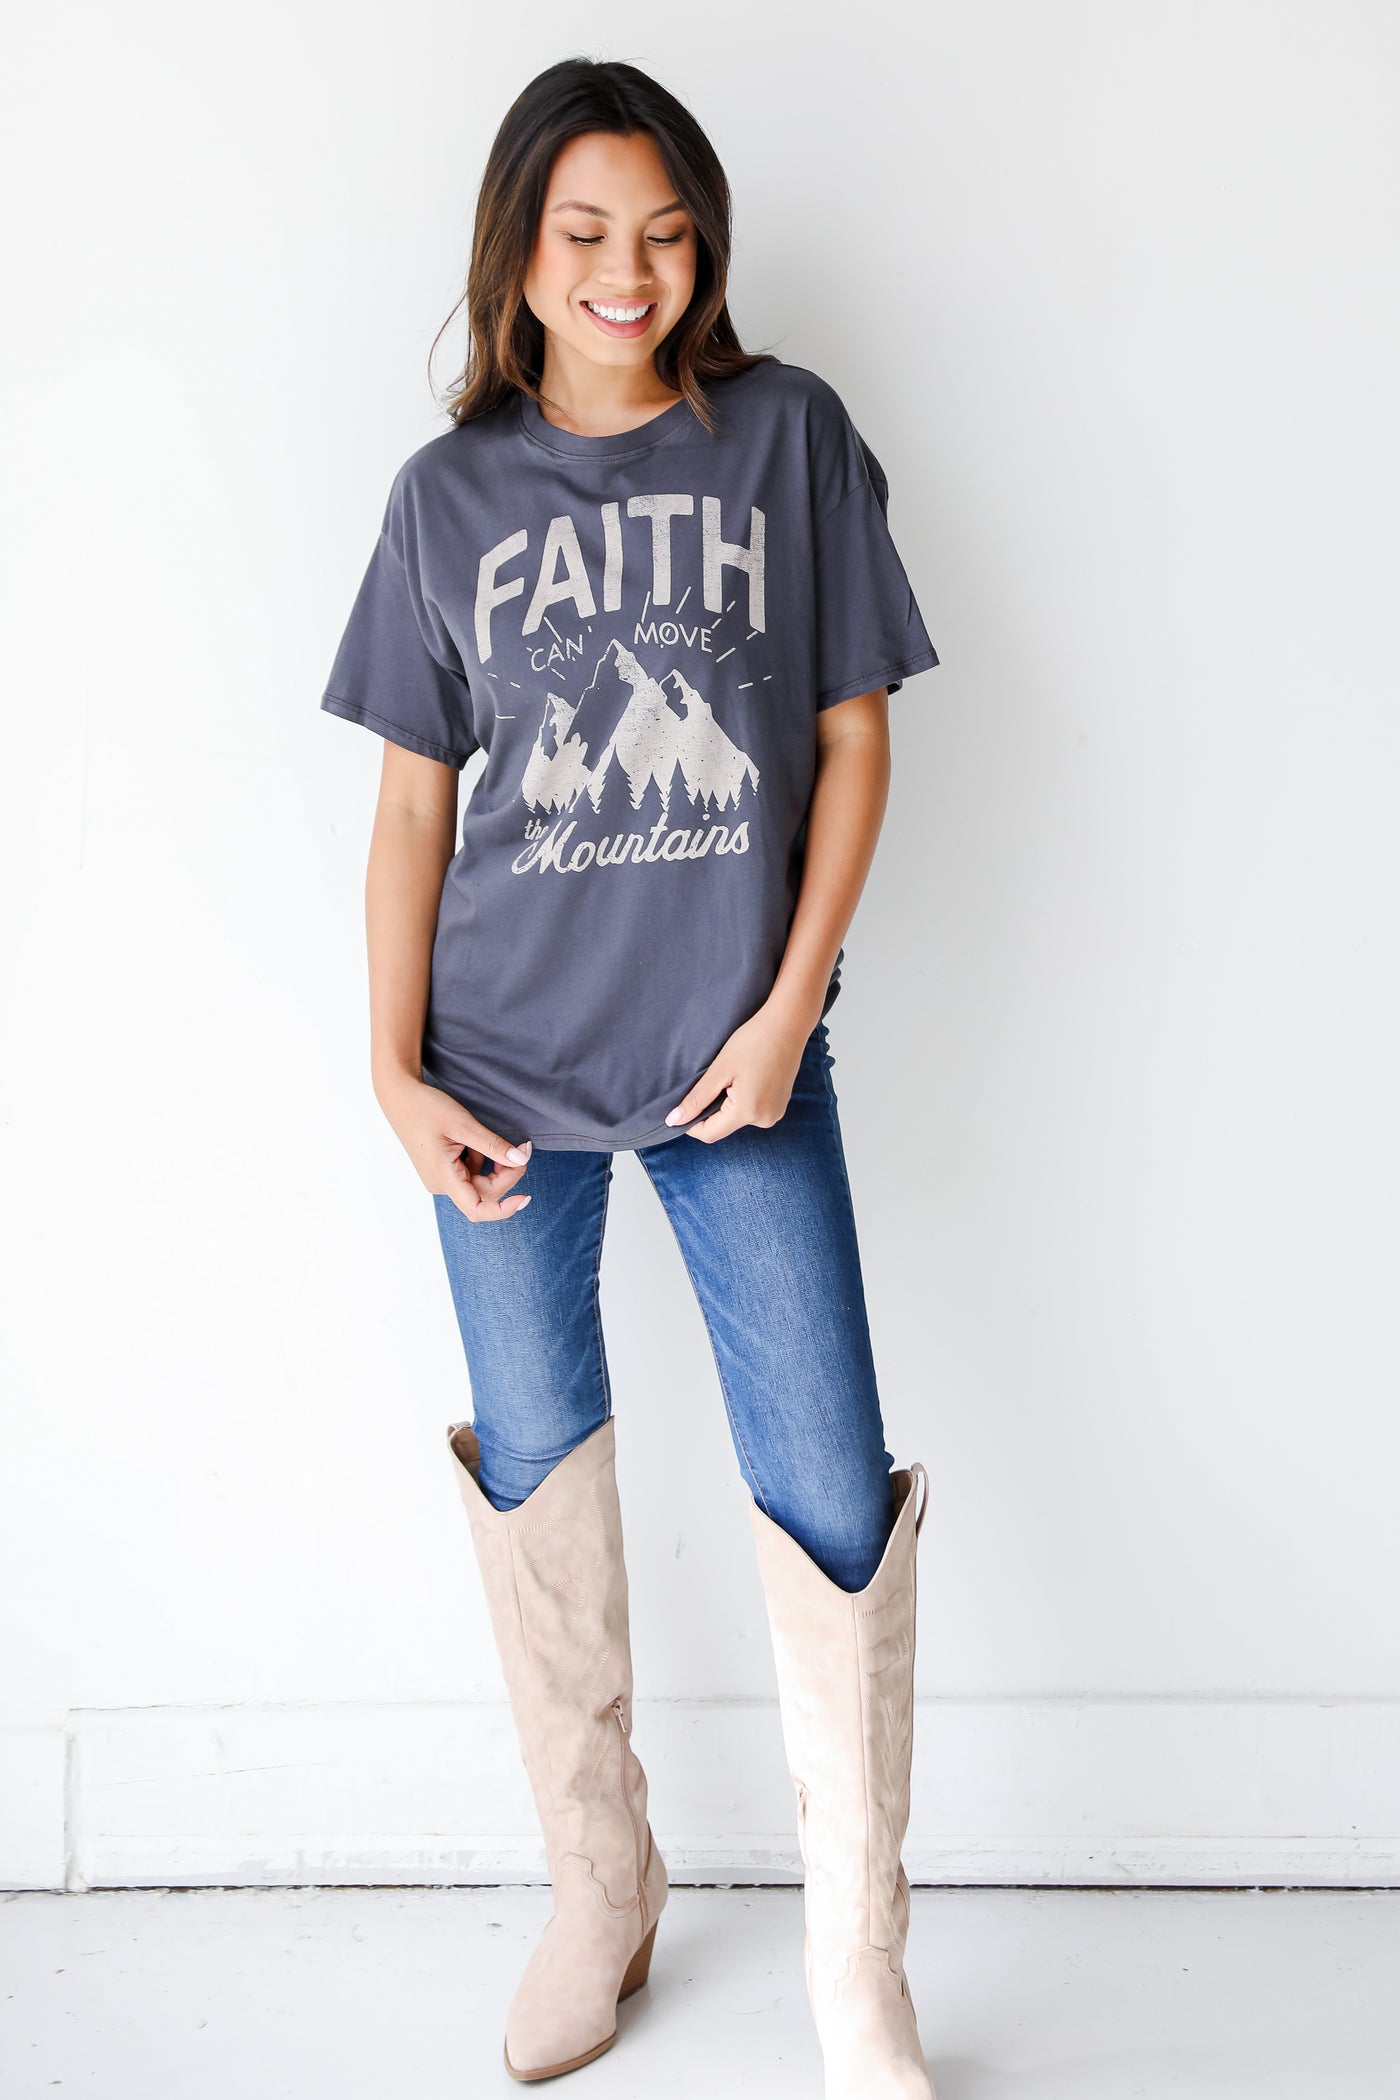 Faith Can Move Mountains Graphic Tee on model